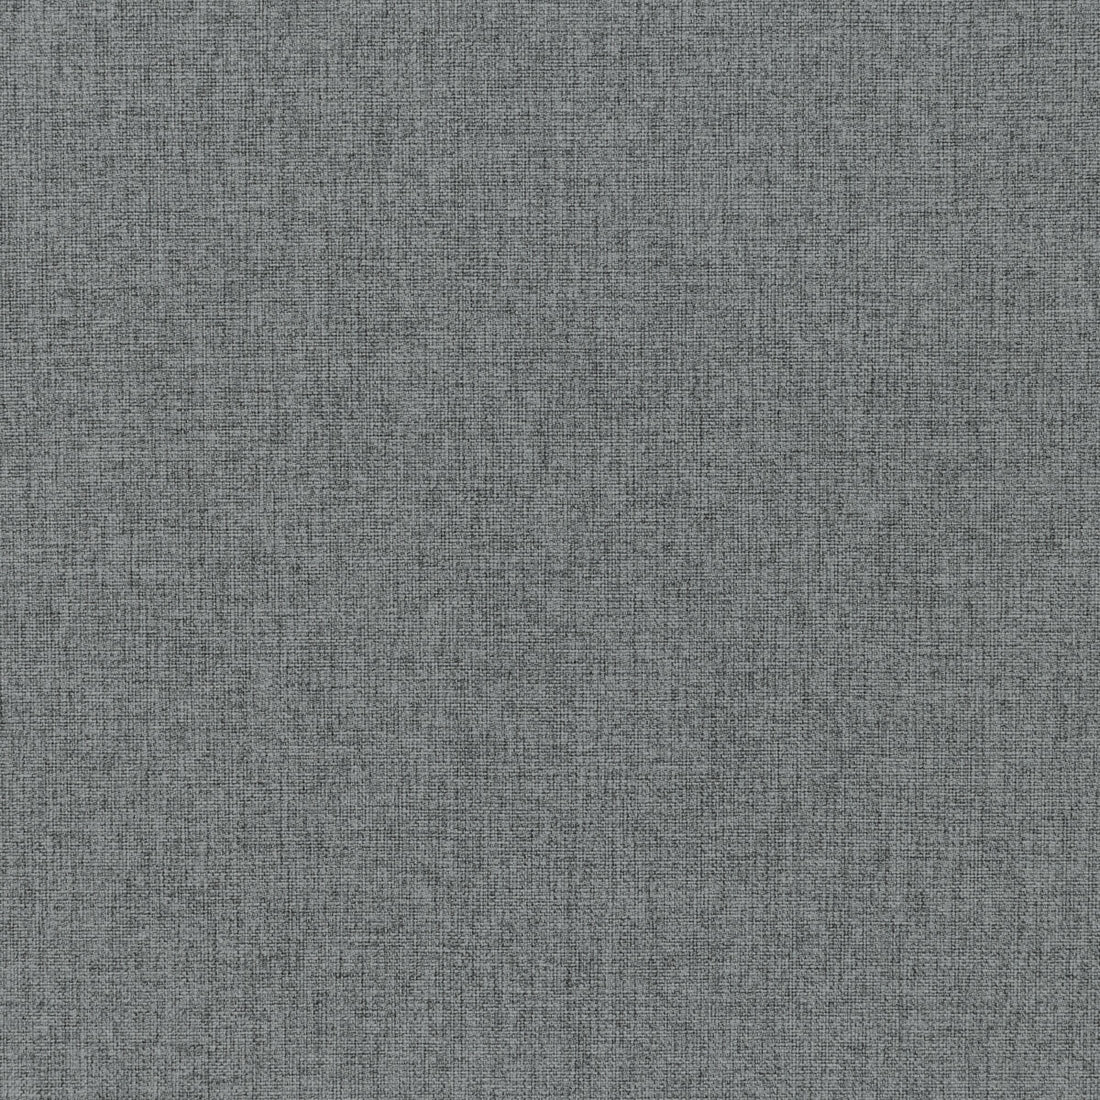 Fortify fabric in moonlight color - pattern 36257.11.0 - by Kravet Contract in the Supreen collection